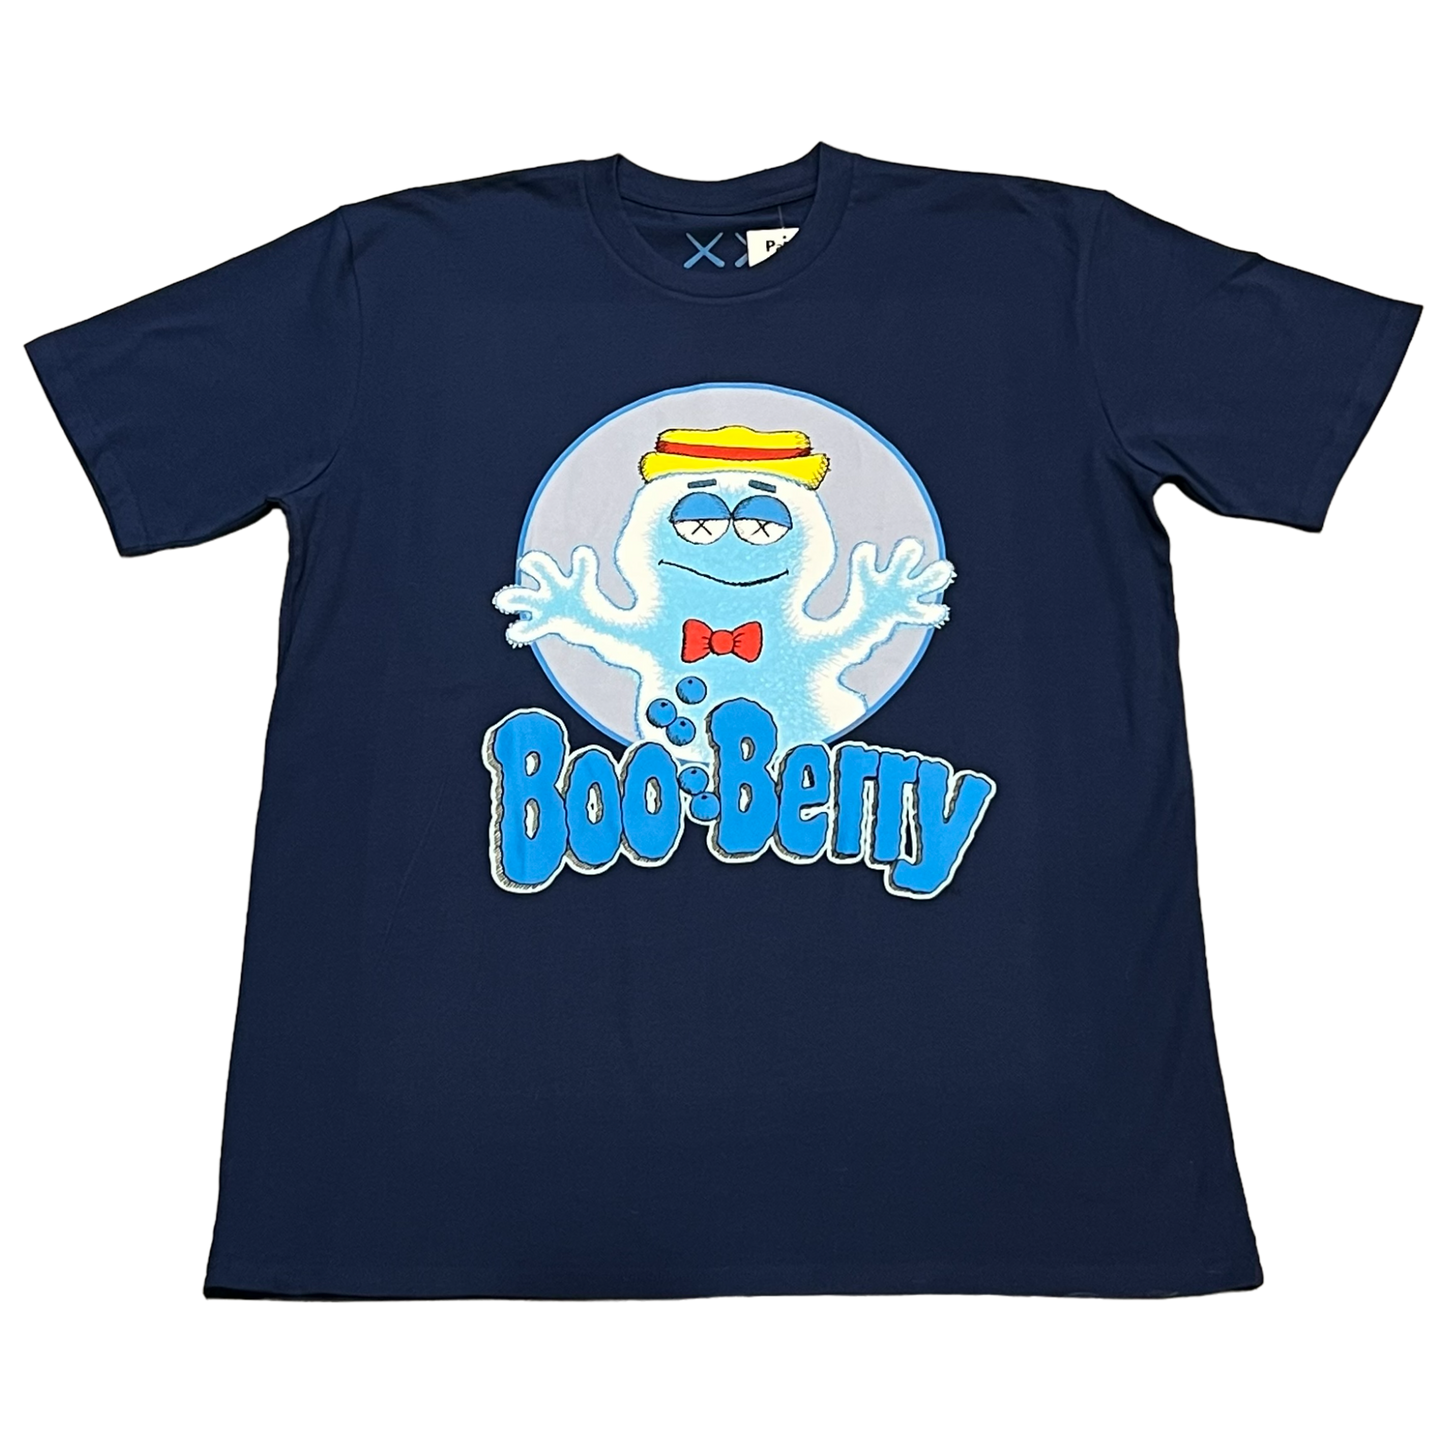 Kaws - "Monsters Boo Berry Blue Tee" - Size XL